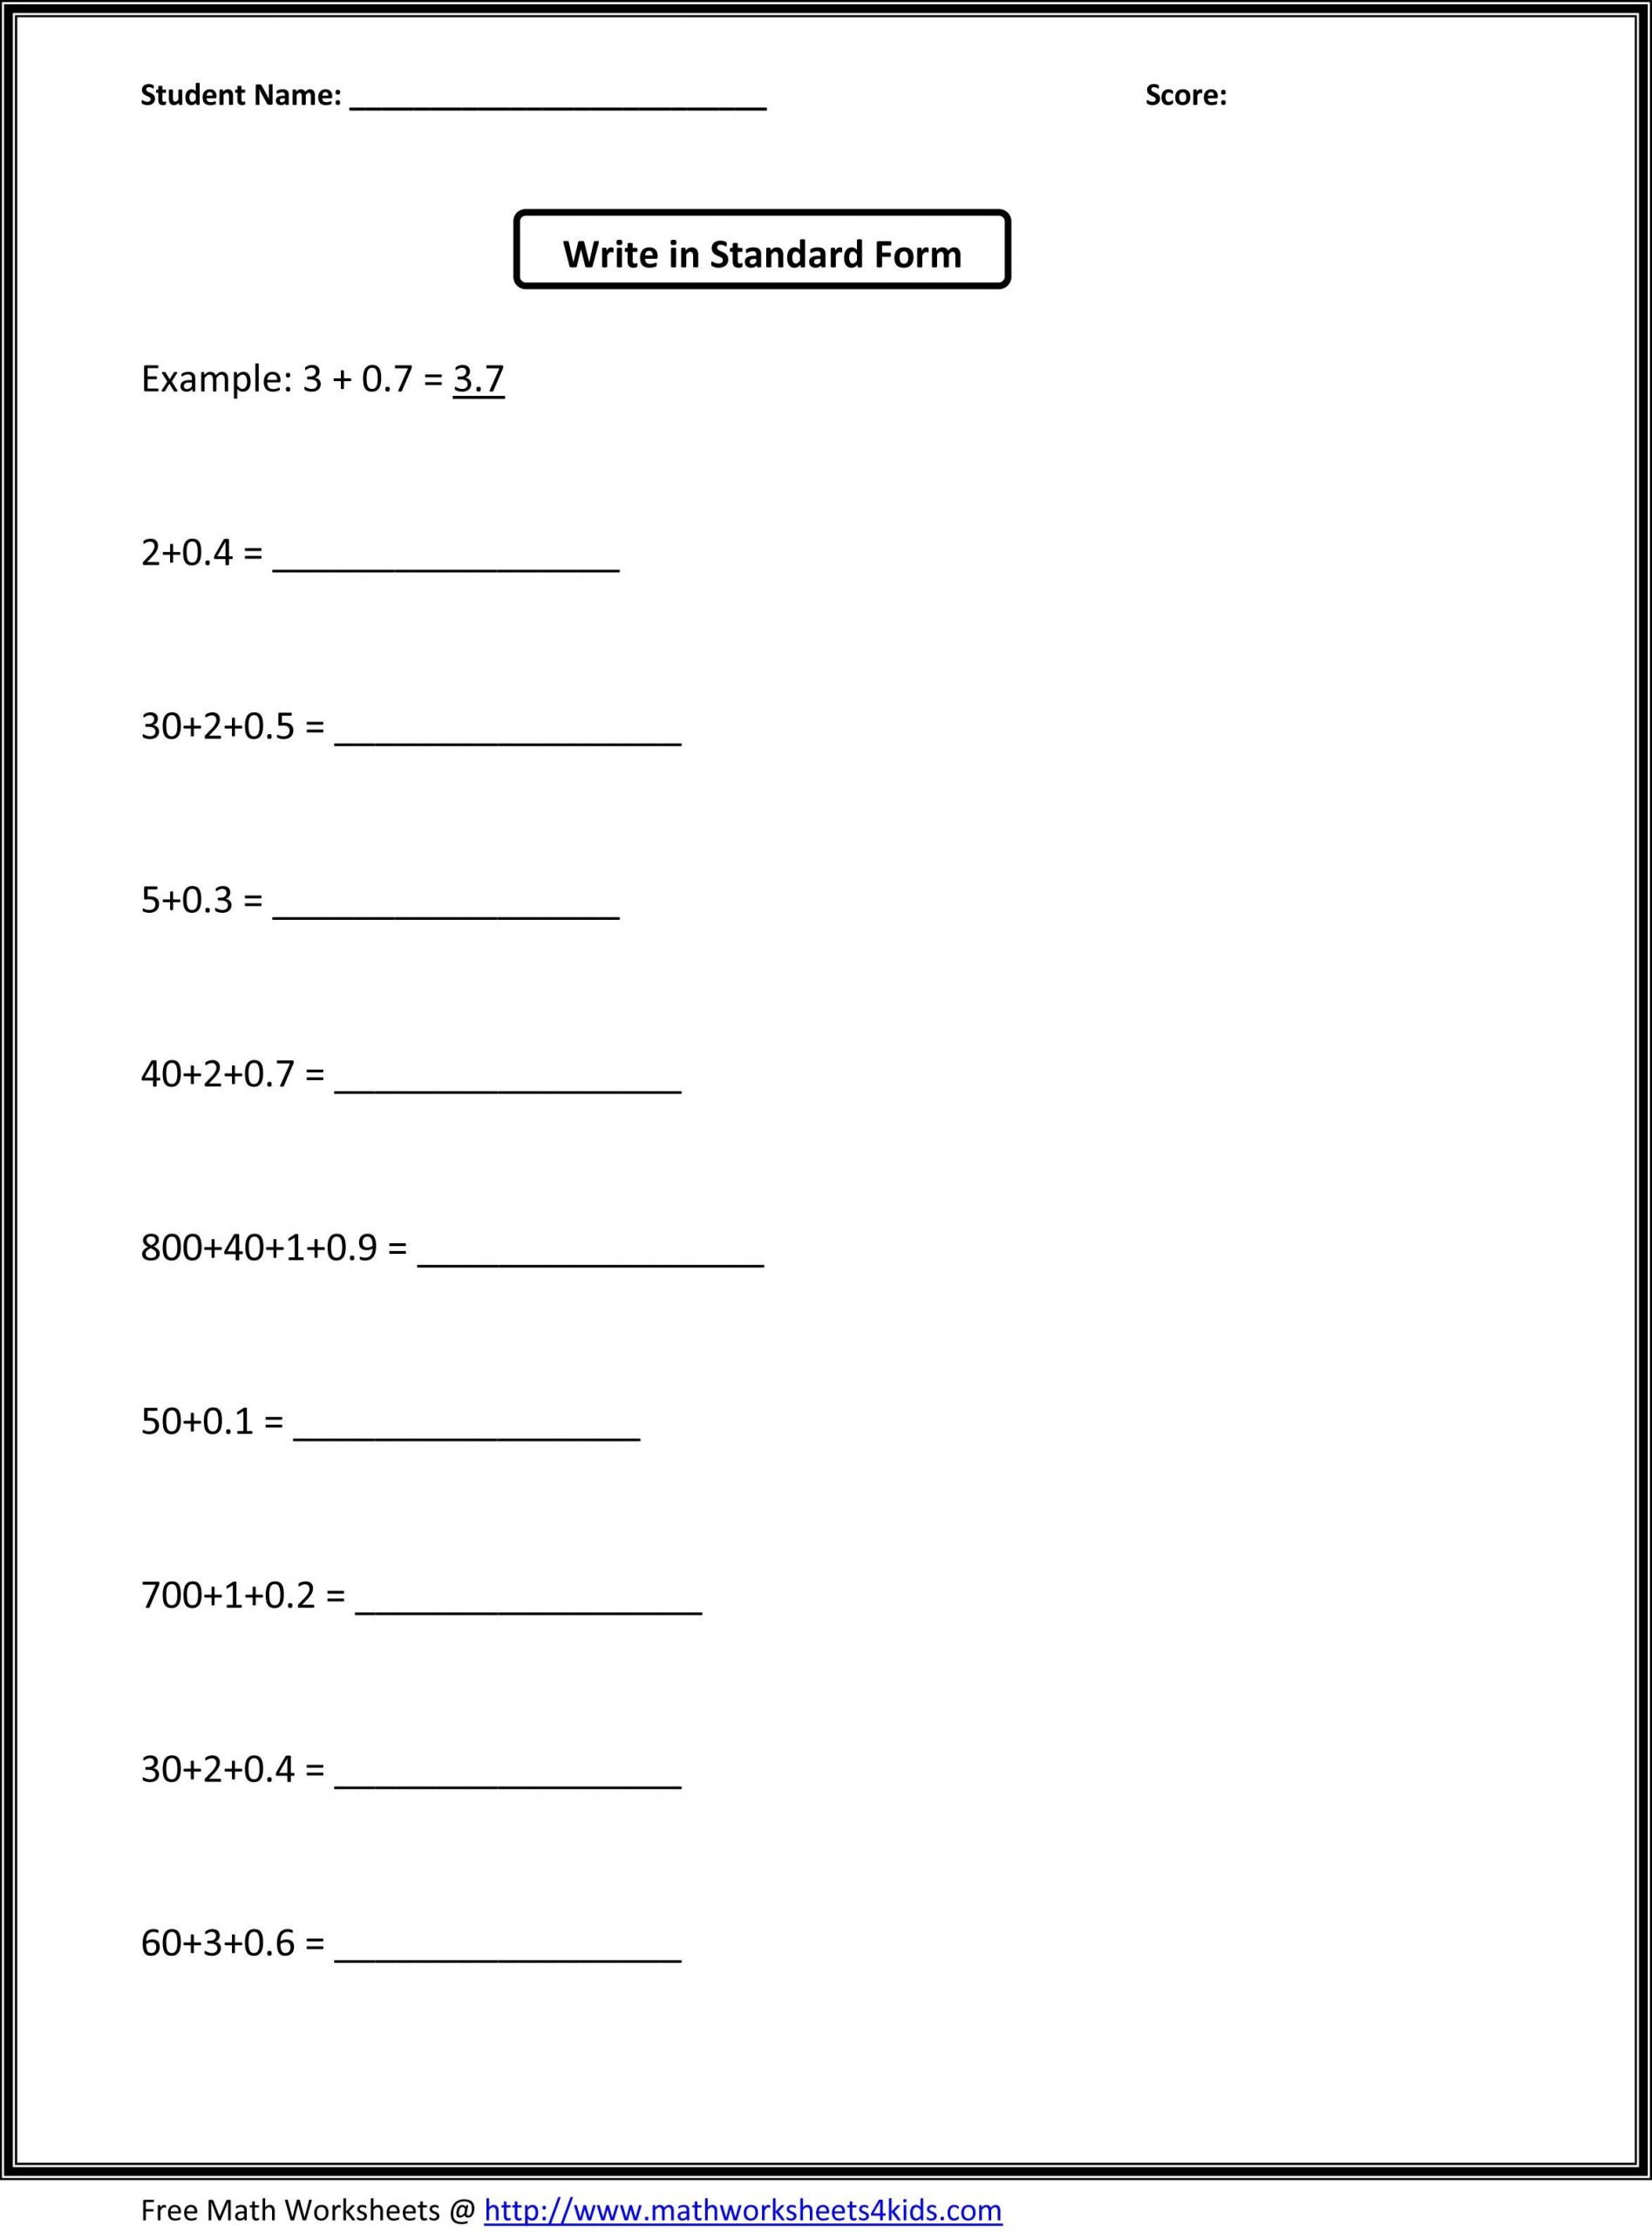 Free Math Worksheets Third Grade 3 Measurement Converting Yards Feet Inches Easy